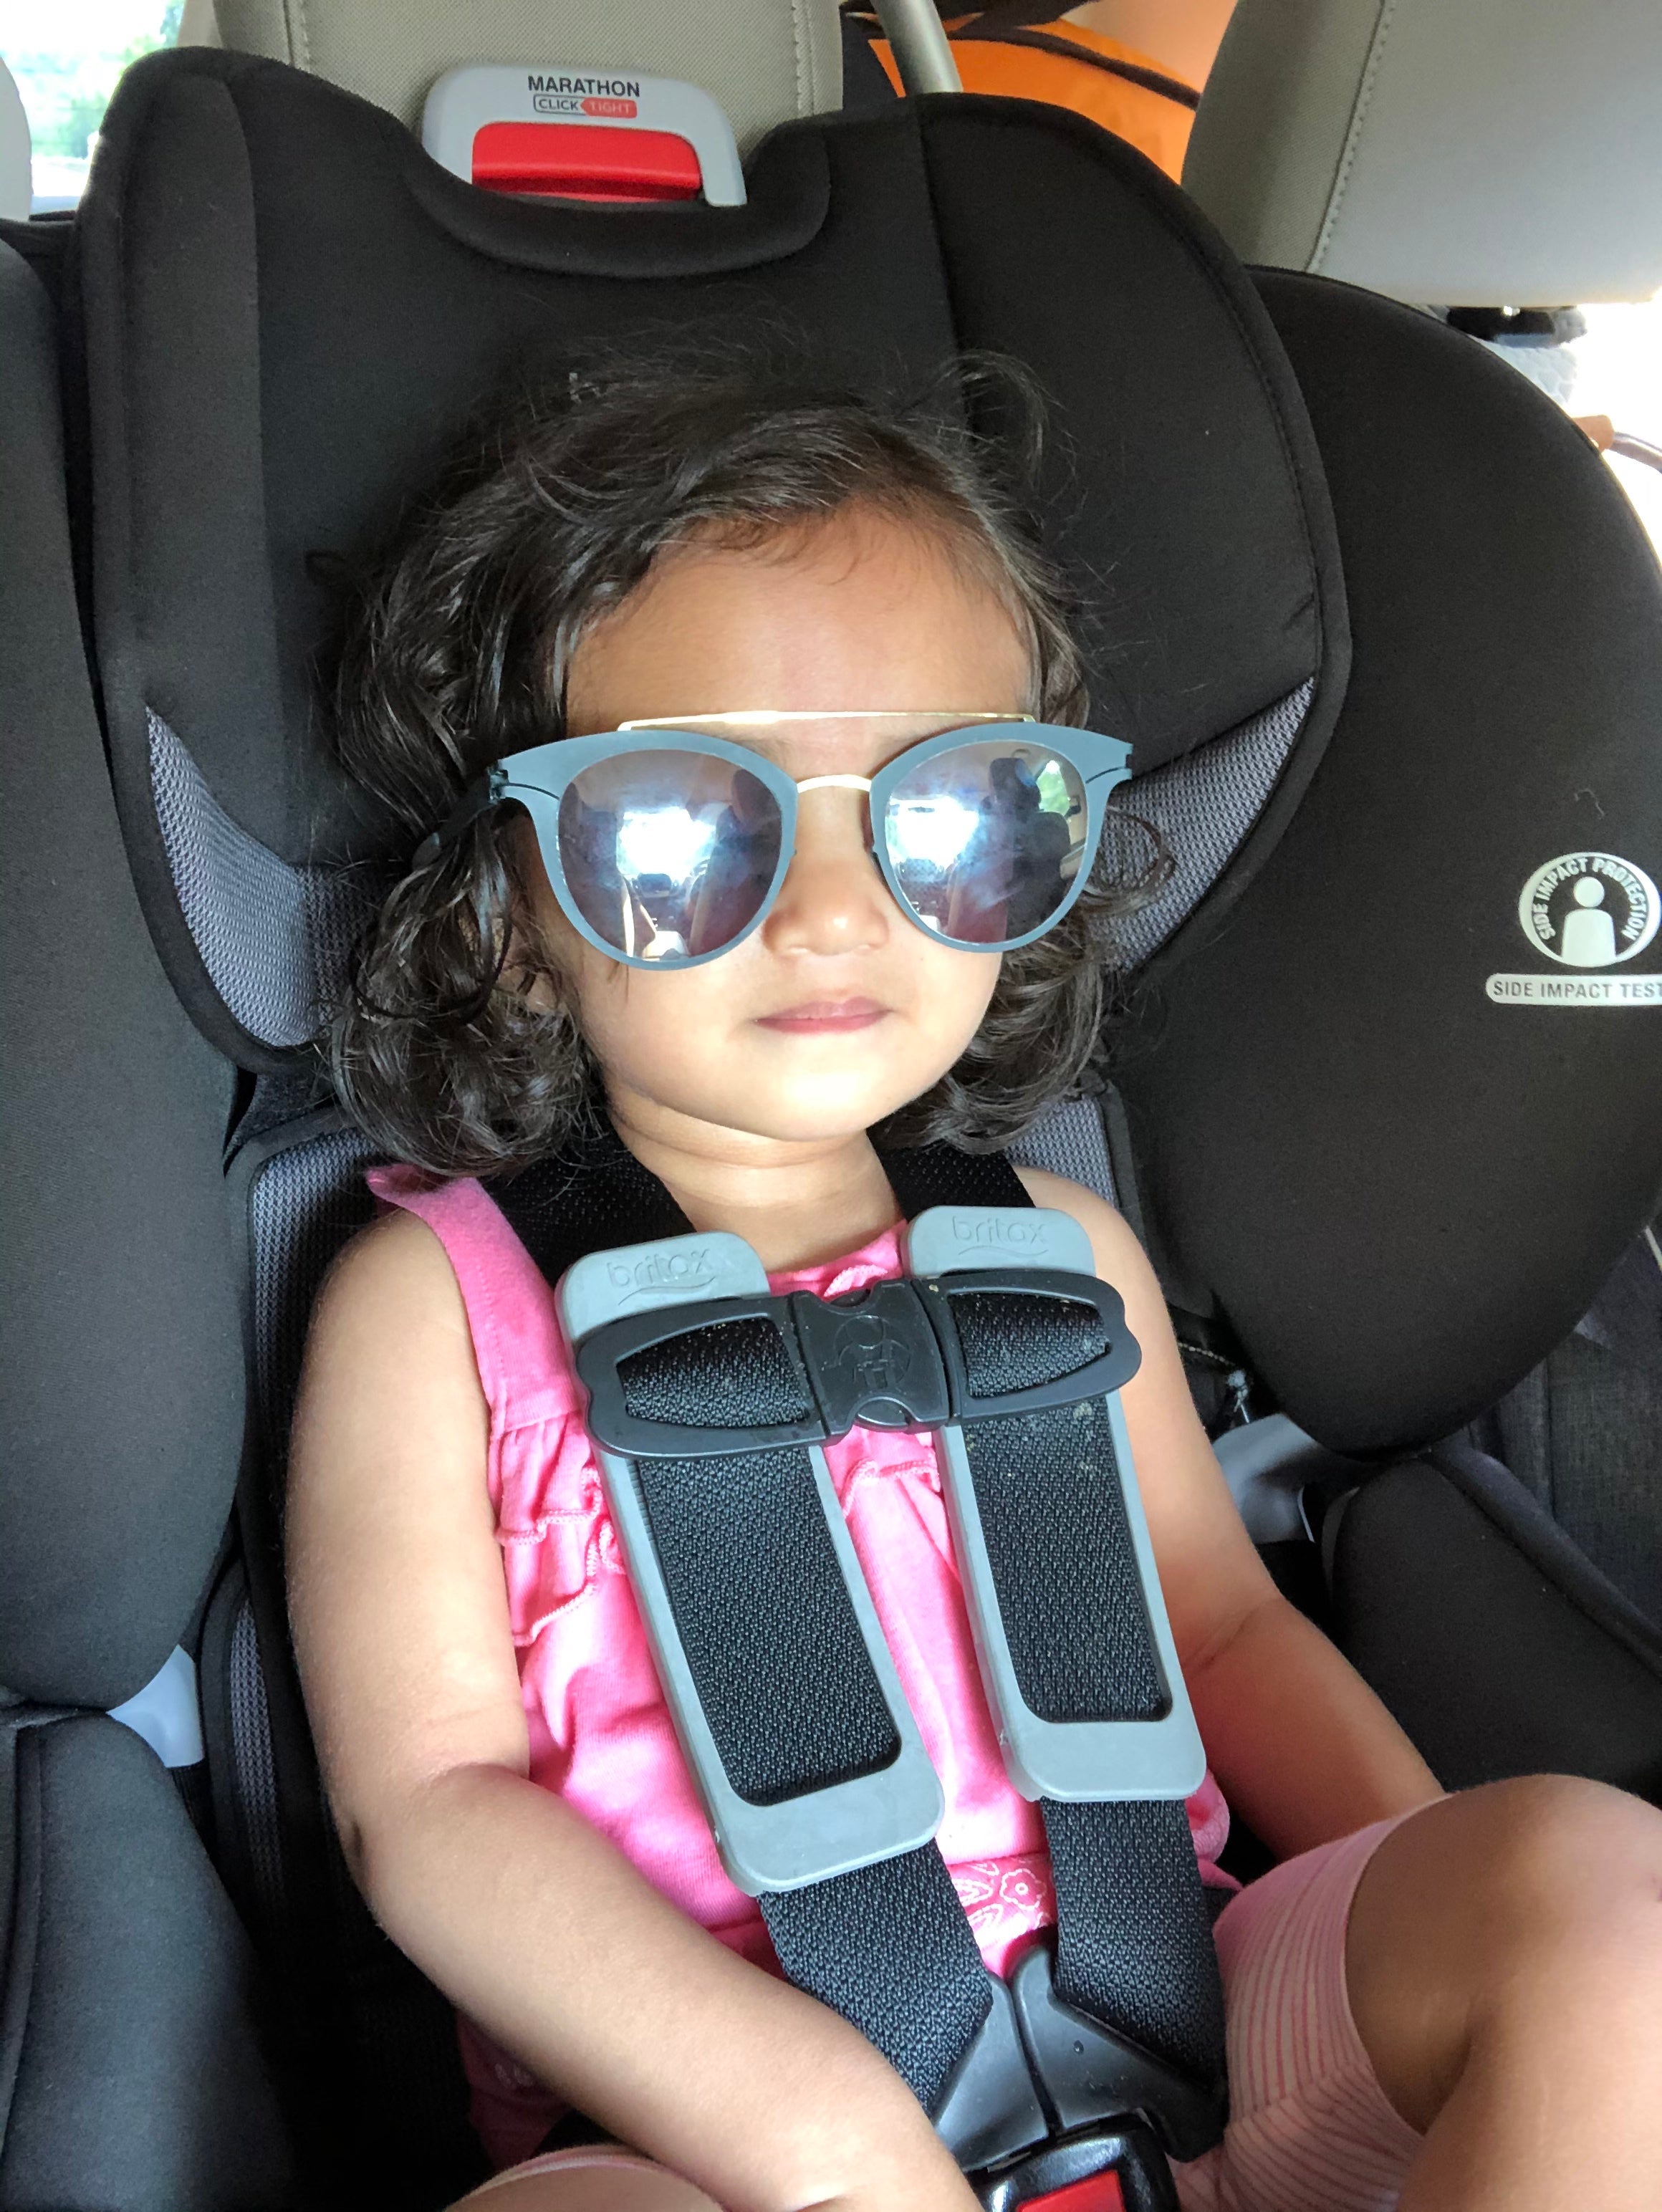 Properly buckled carseat safety